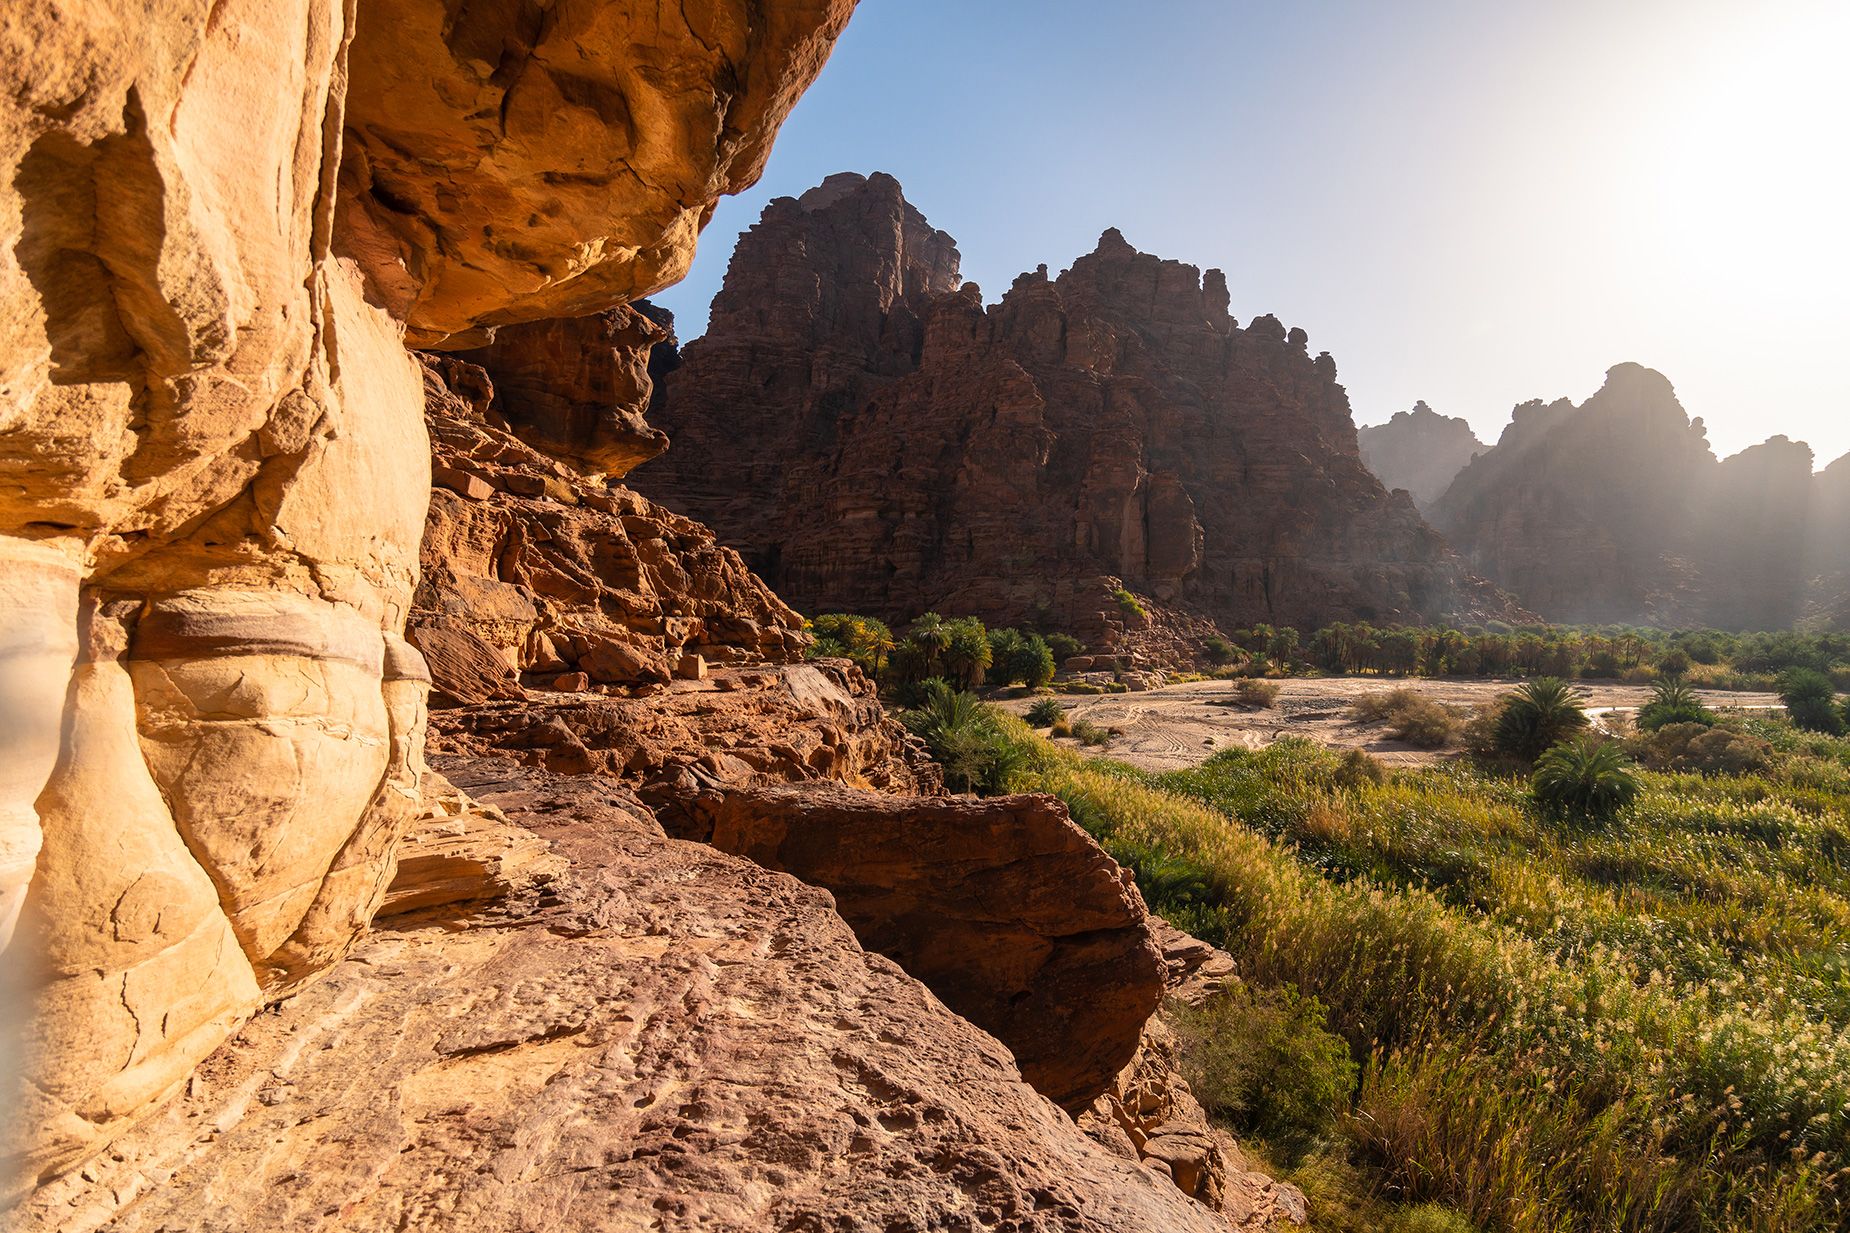 Wadi Al Disah is a green, spring-fed valley, known as “valley of the palm trees”, surrounded by towering sandstone cliffs in the mountains of southwest Tabuk province.